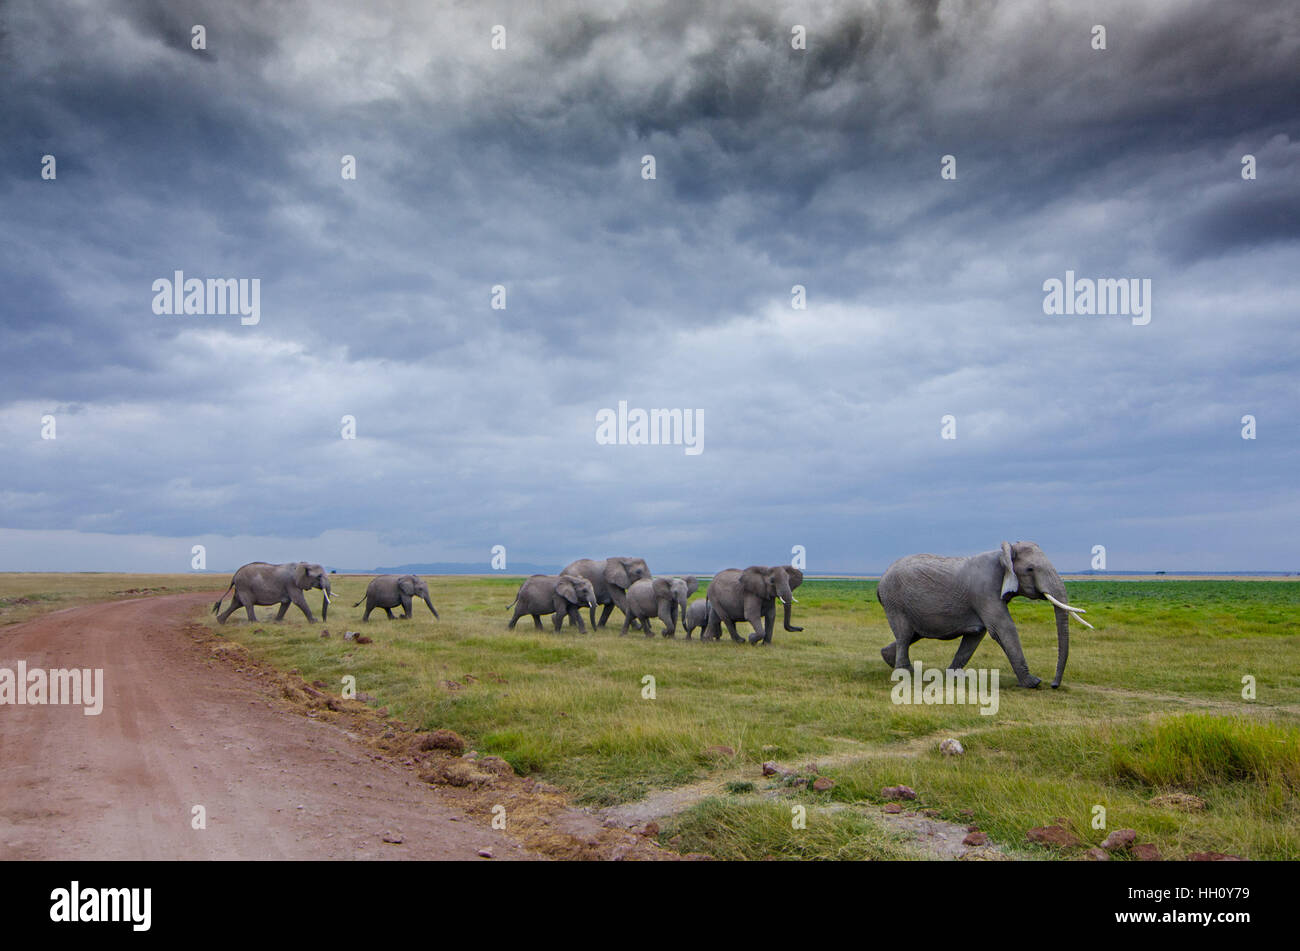 Marching elephants with dramatic clouds Stock Photo